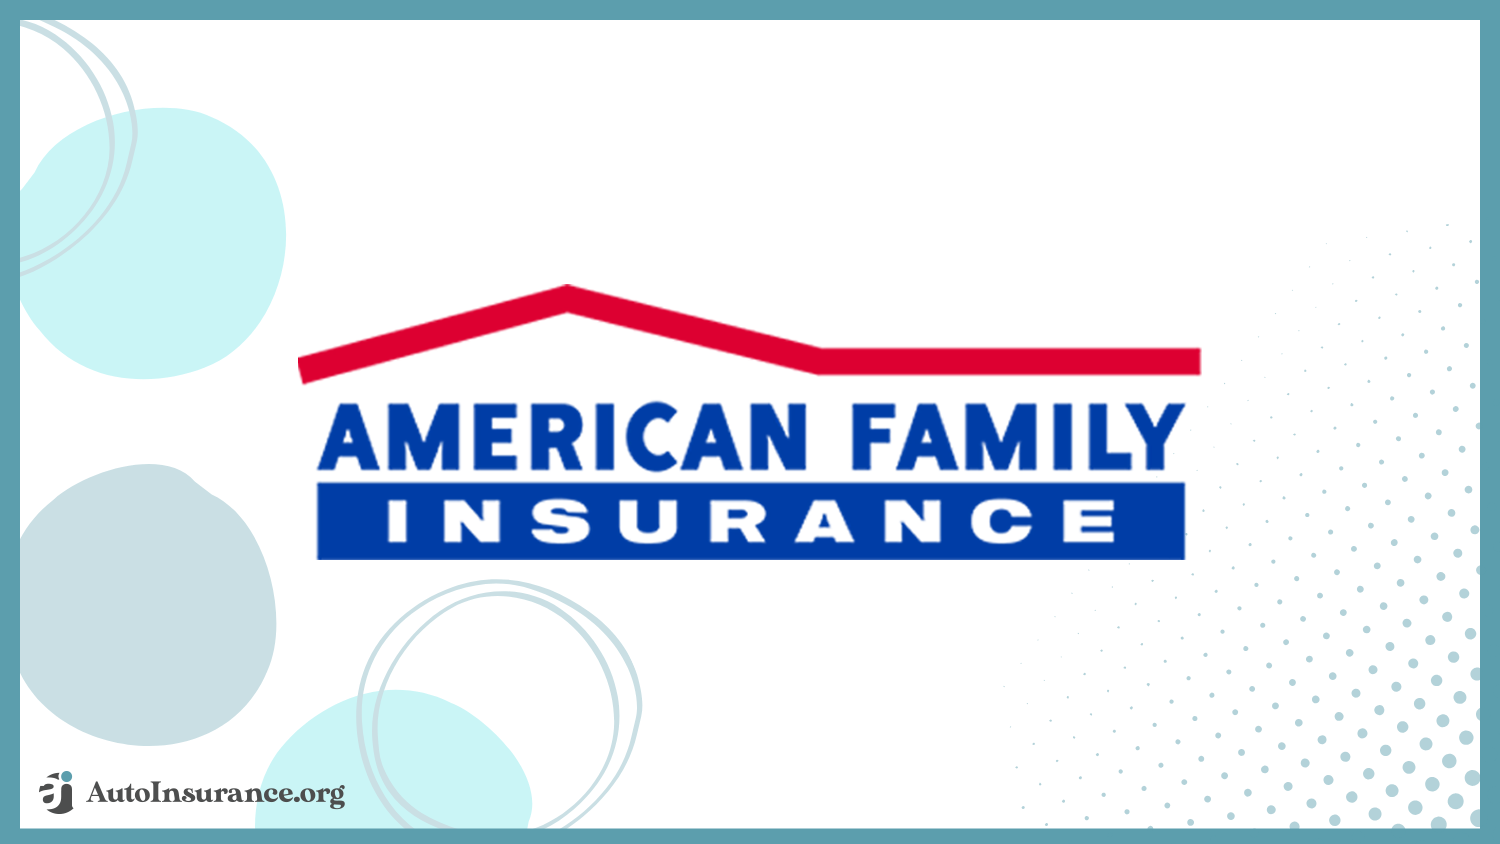 American Family: Best Auto Insurance for Cancer Patients